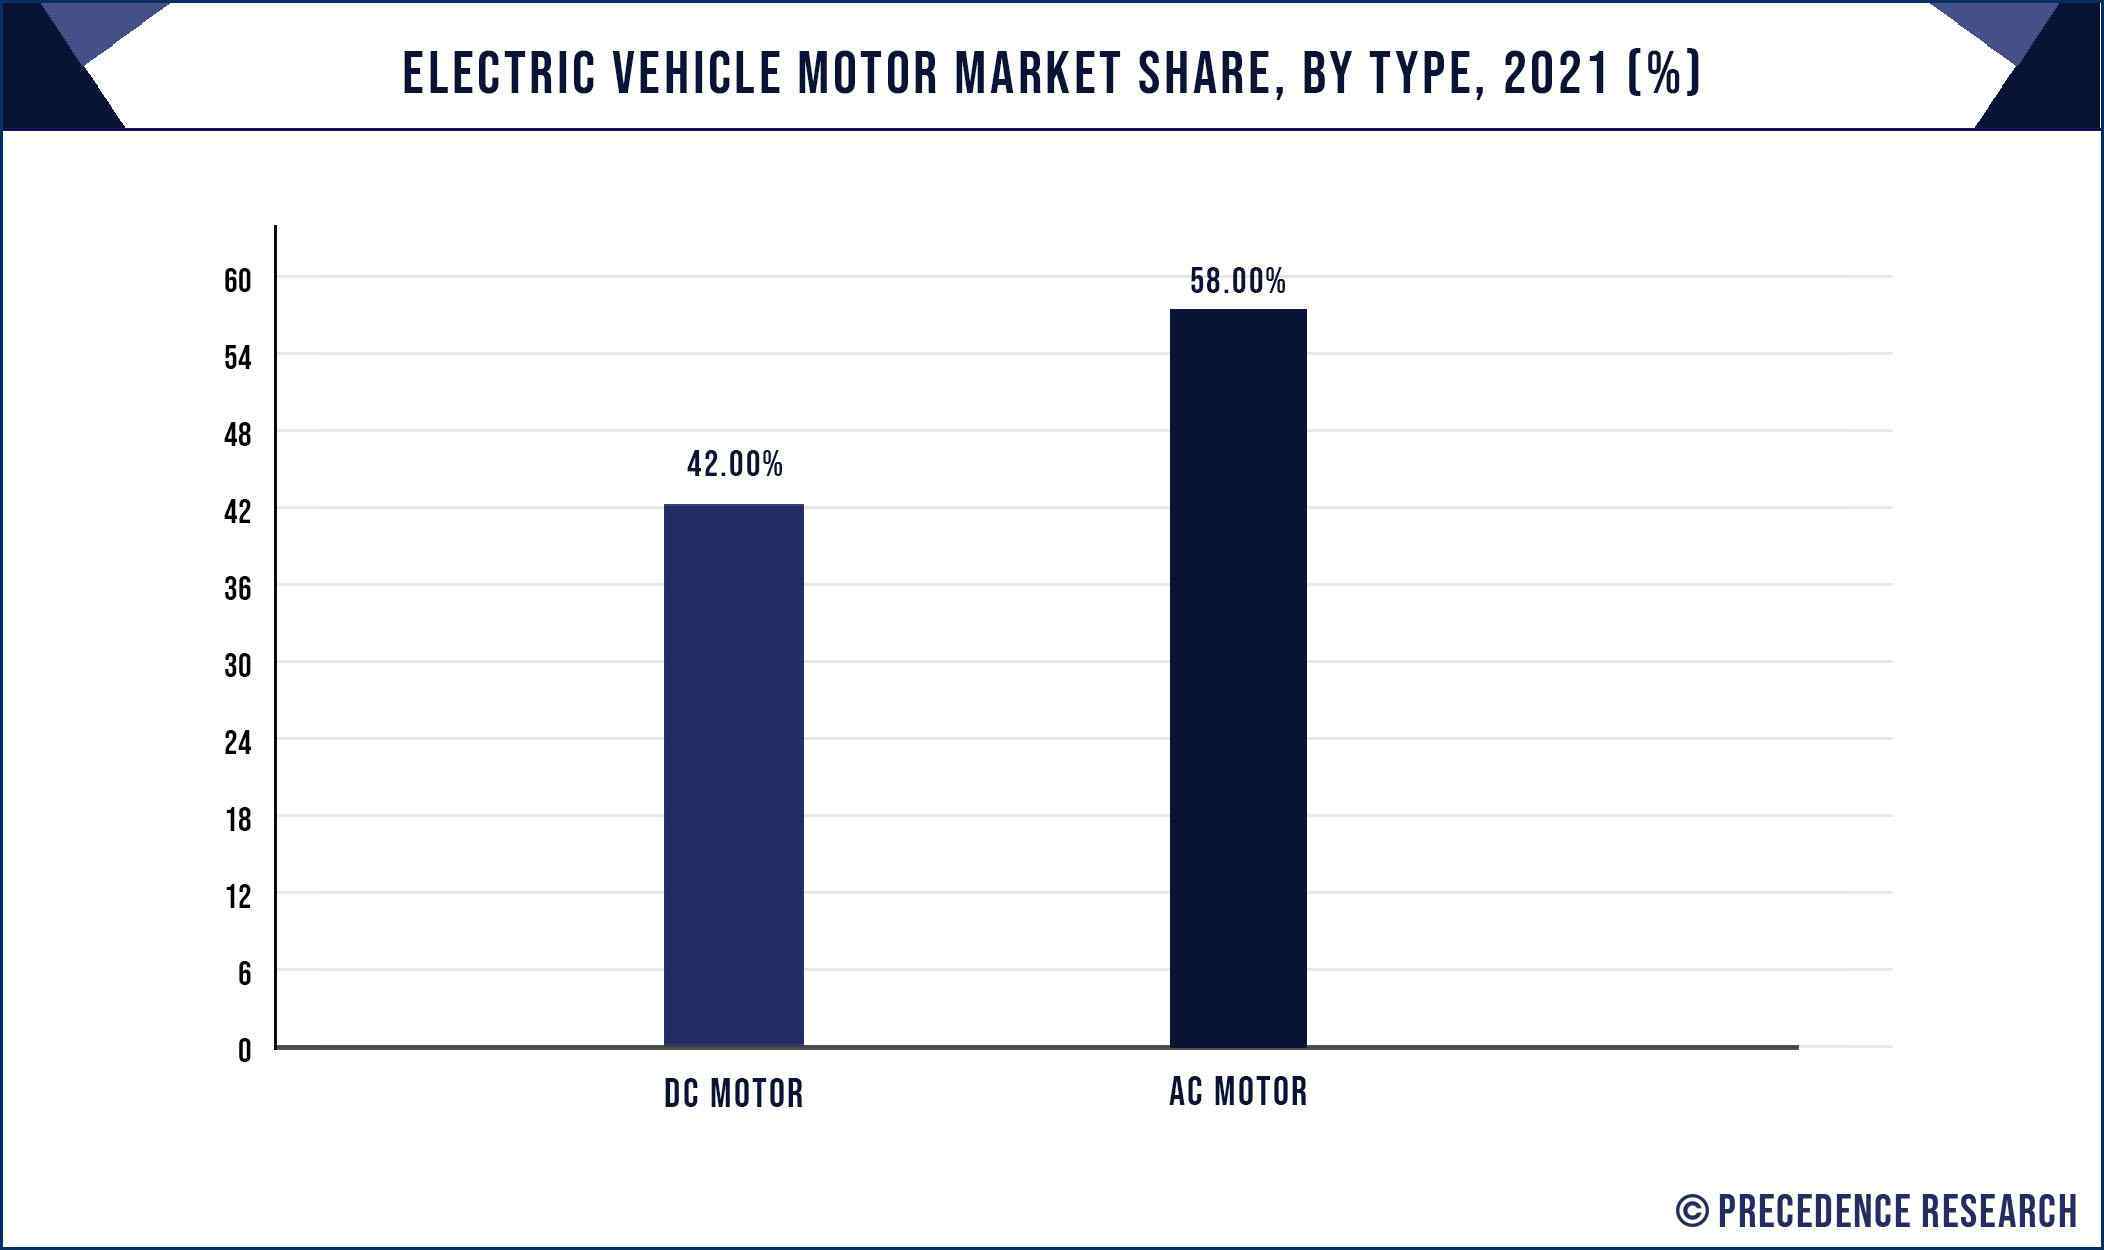 Electric Vehicle Motor Market Share, By Type, 2022 to 2030